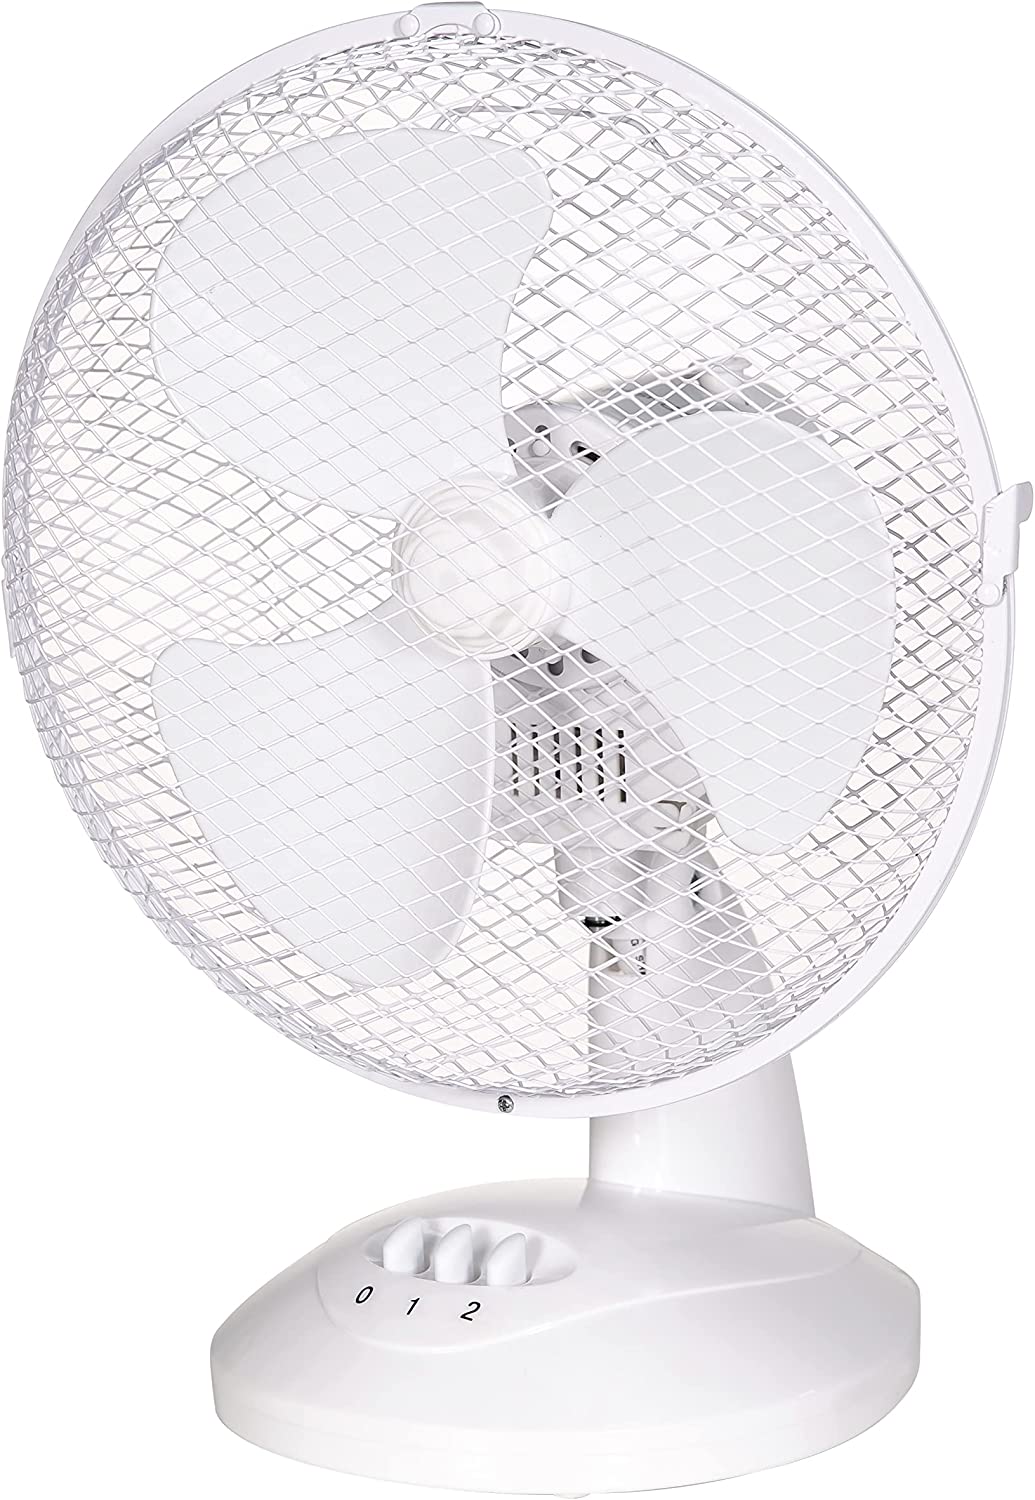 Ideal for the summer months, this fan comes in at £12.99